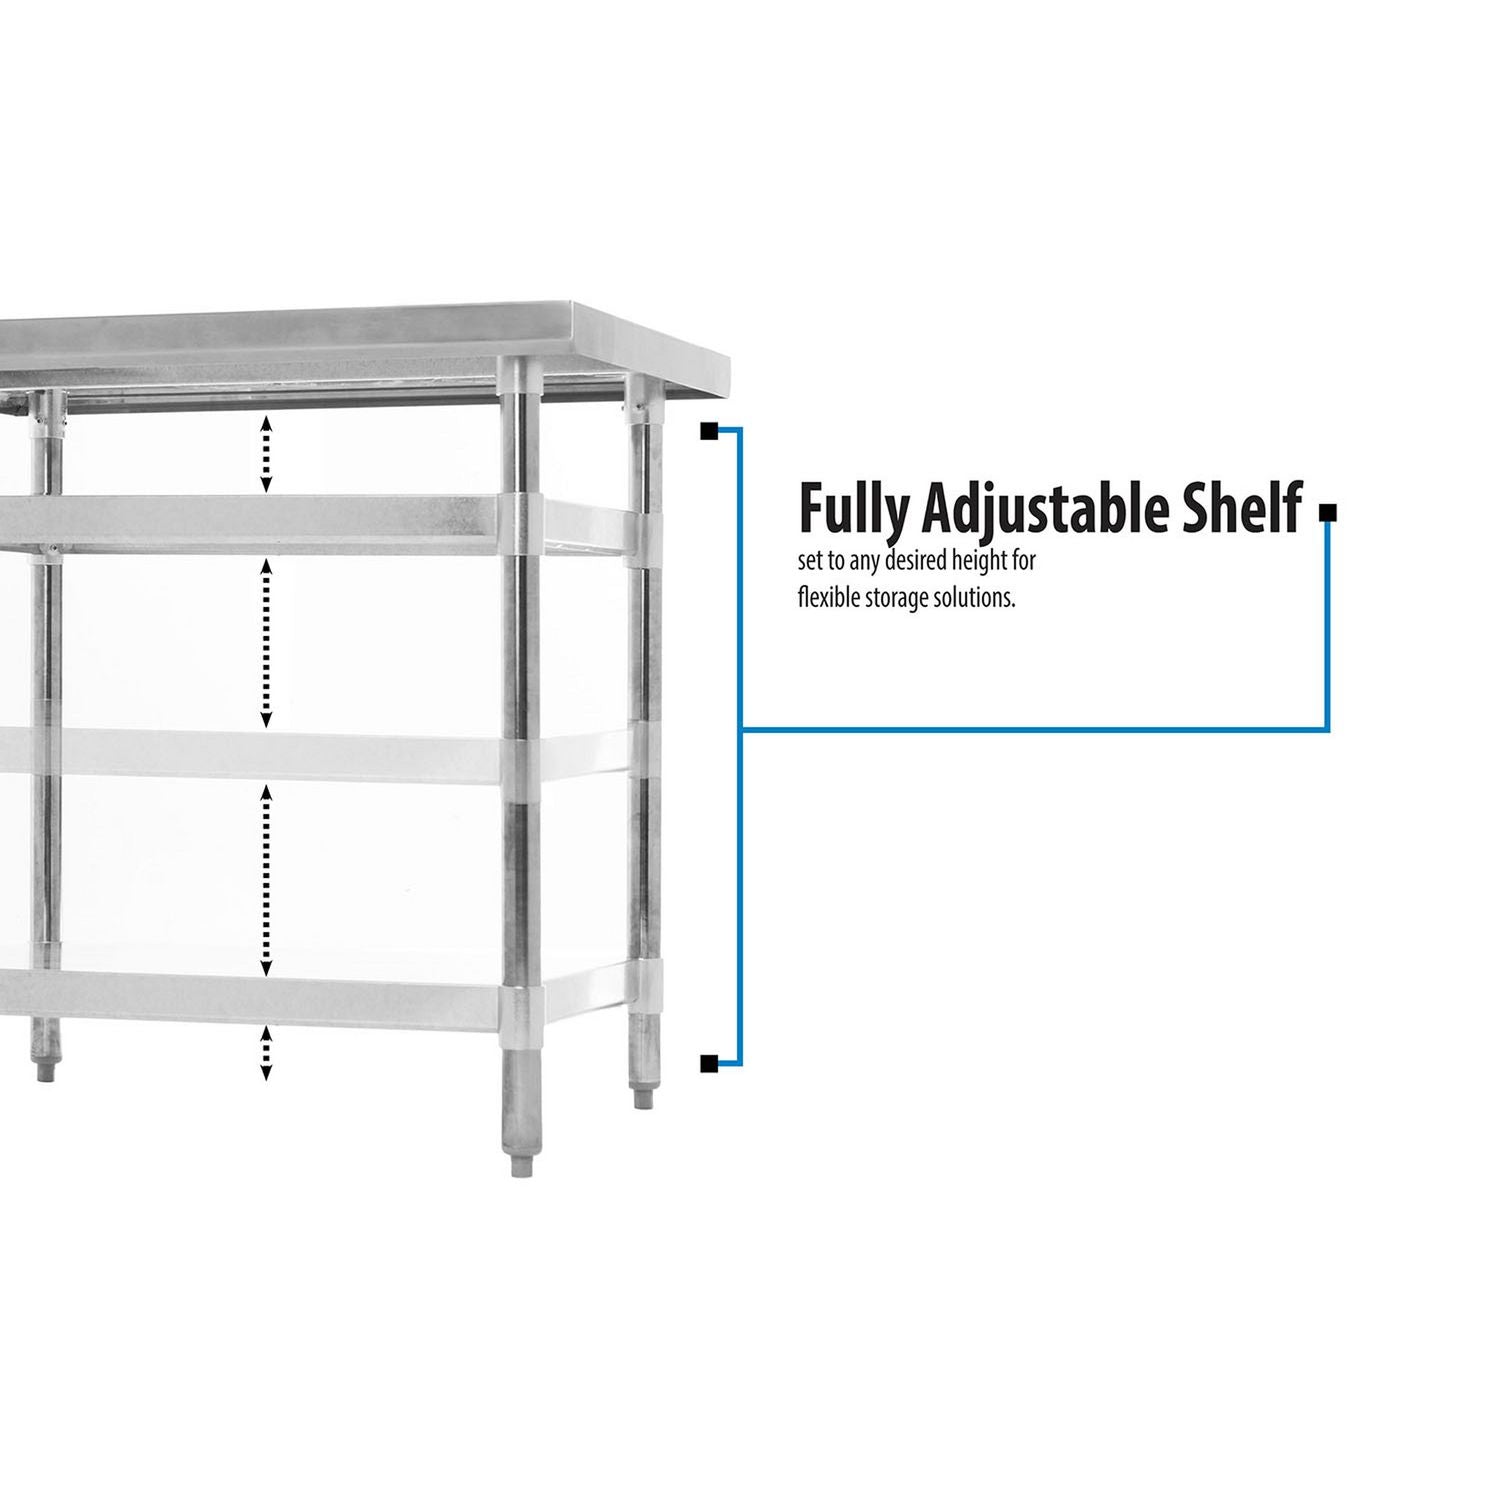 Stainless Steel Flat Top Work Tables, 48w x 24d x 36h, Silver, 2/Pallet, Ships in 4-6 Business Days - 4